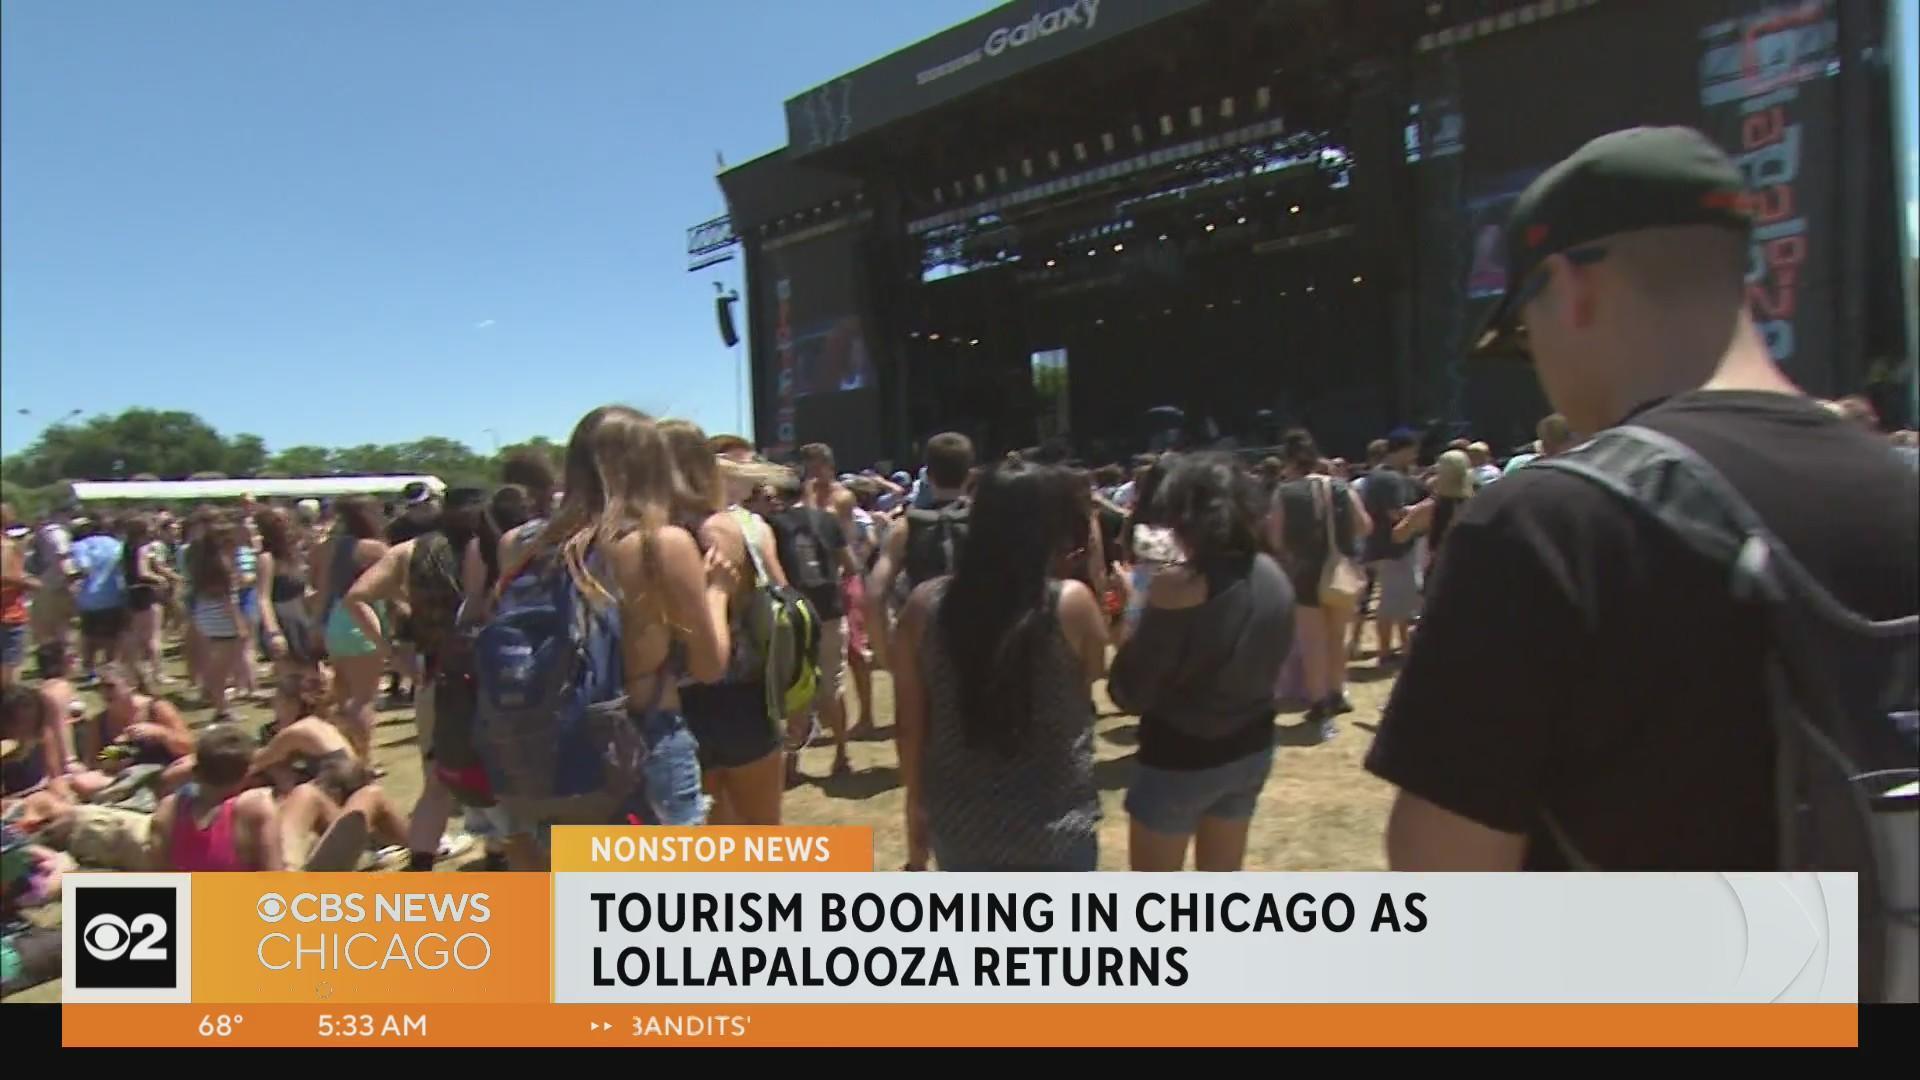 Report: Lollapalooza could return at or near full capacity